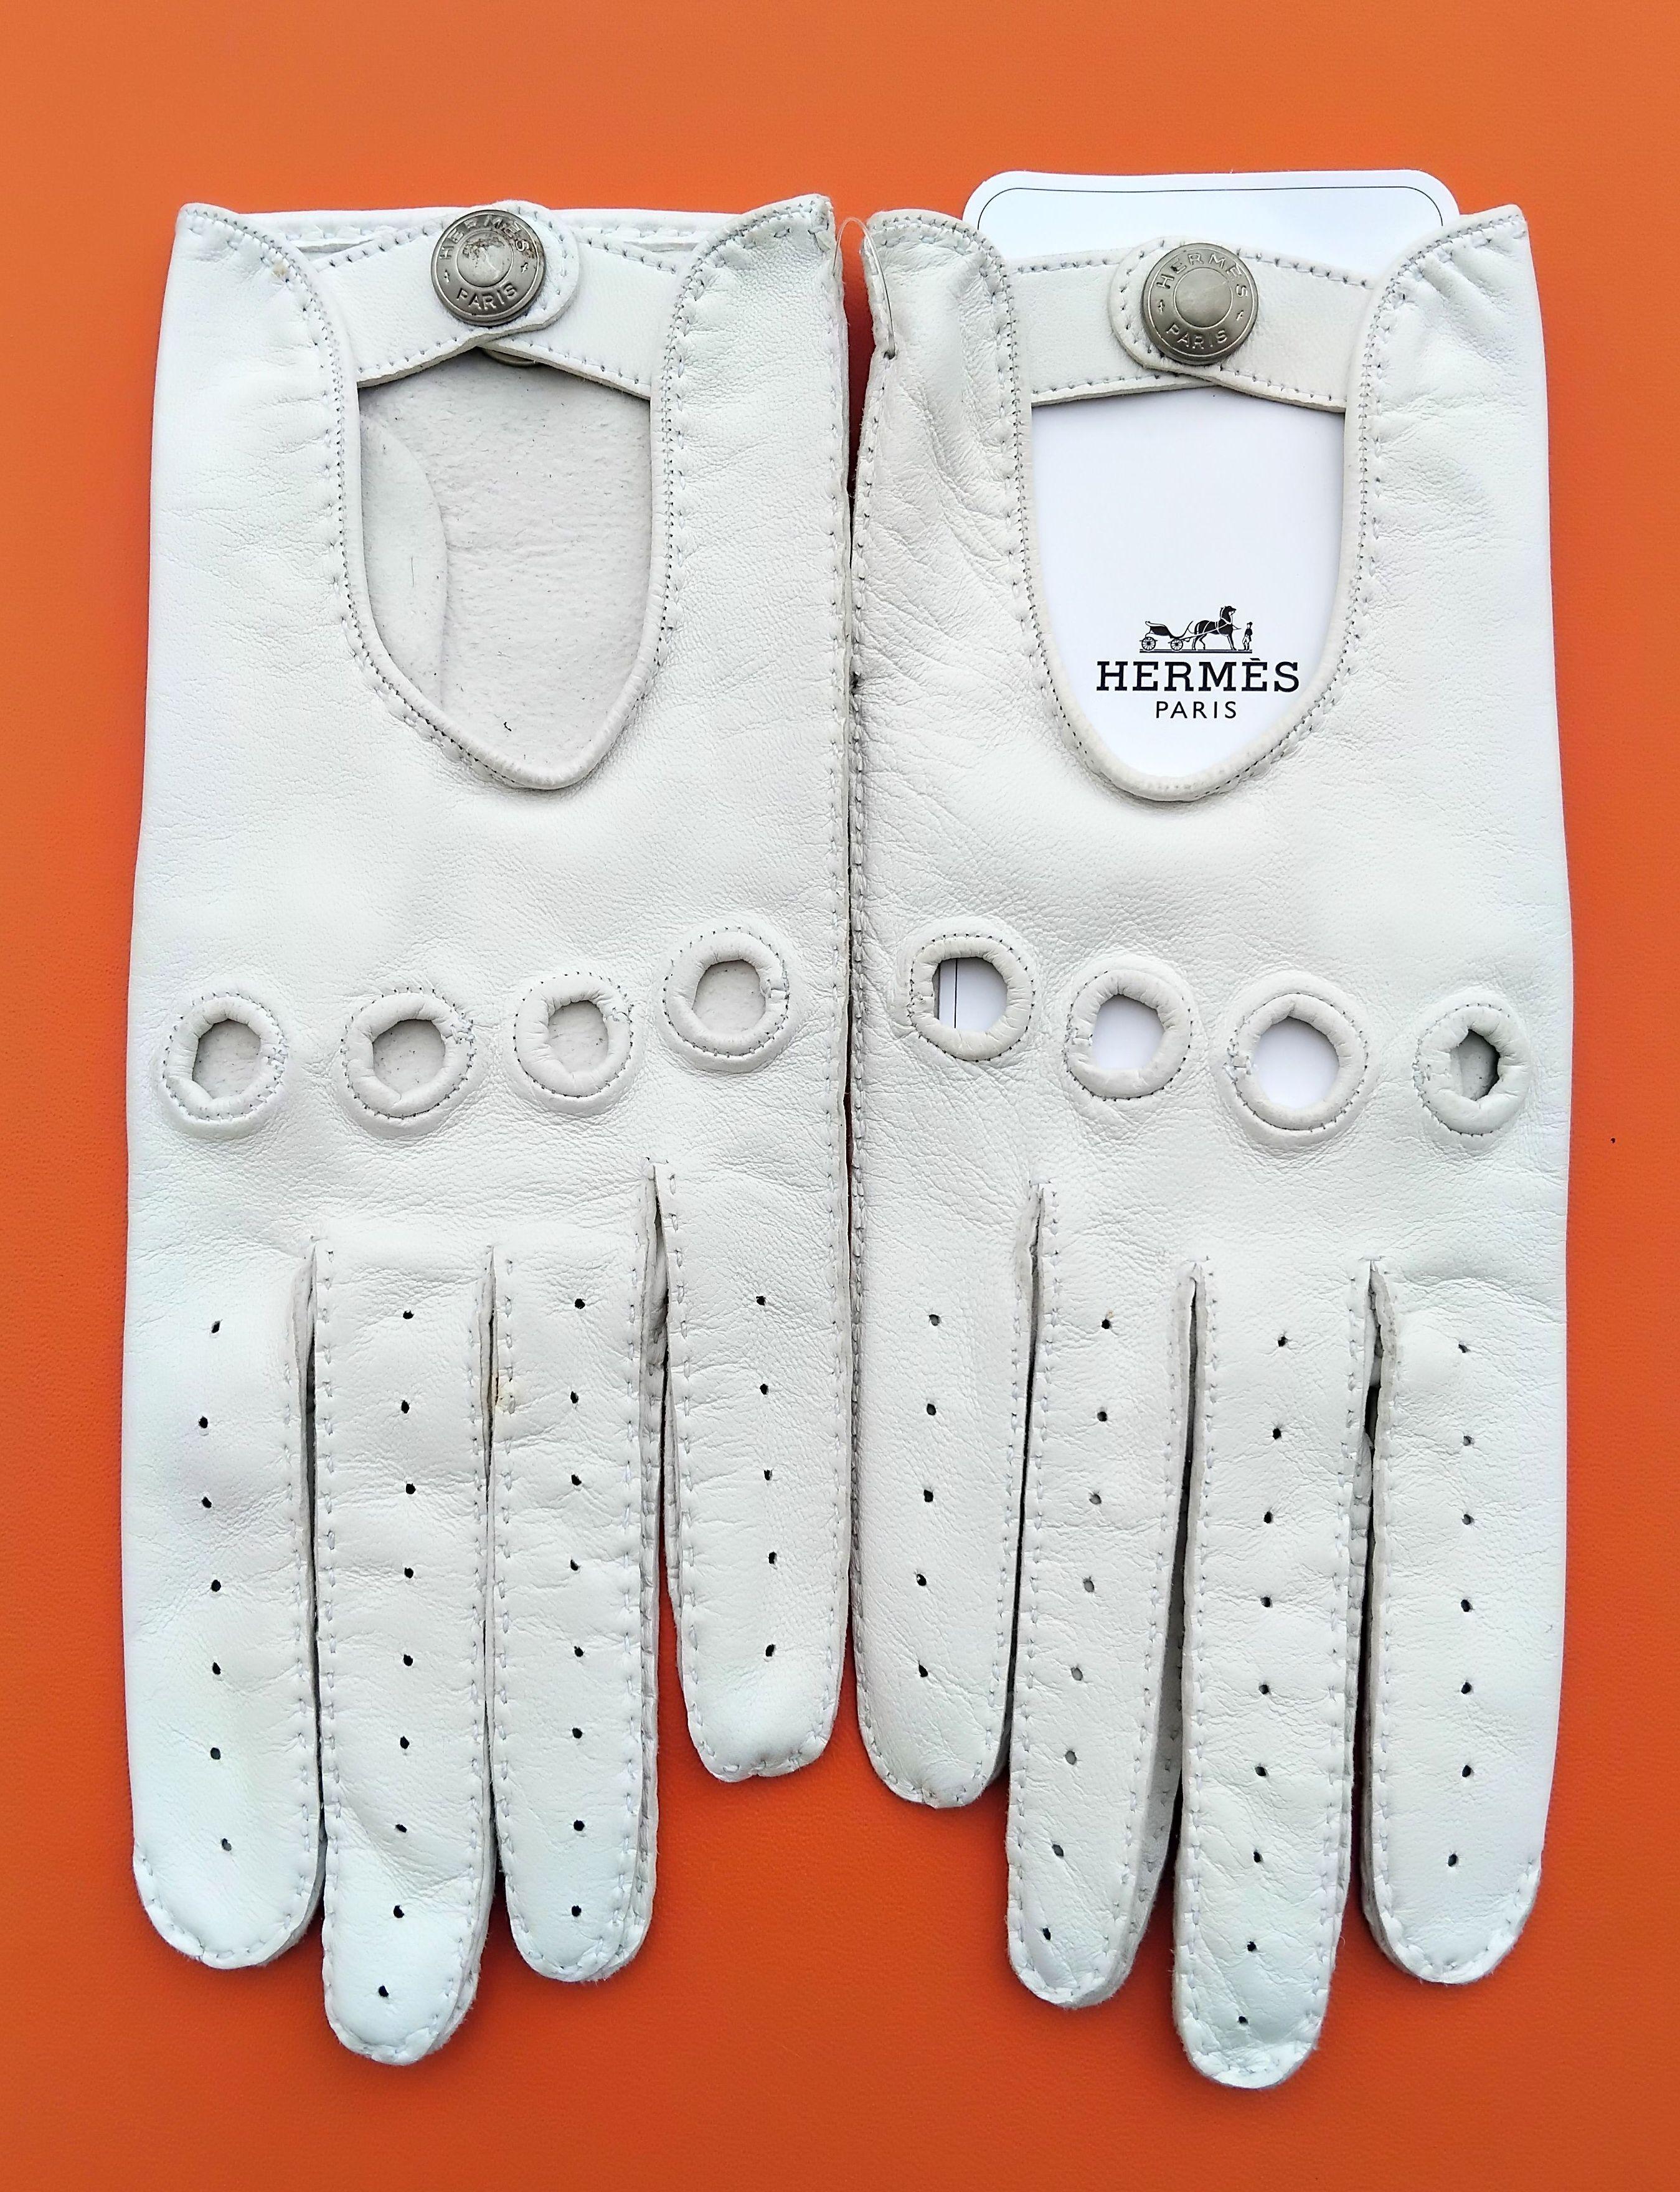 Exceptional Hermès Driving Gloves White Leather Size 7 7